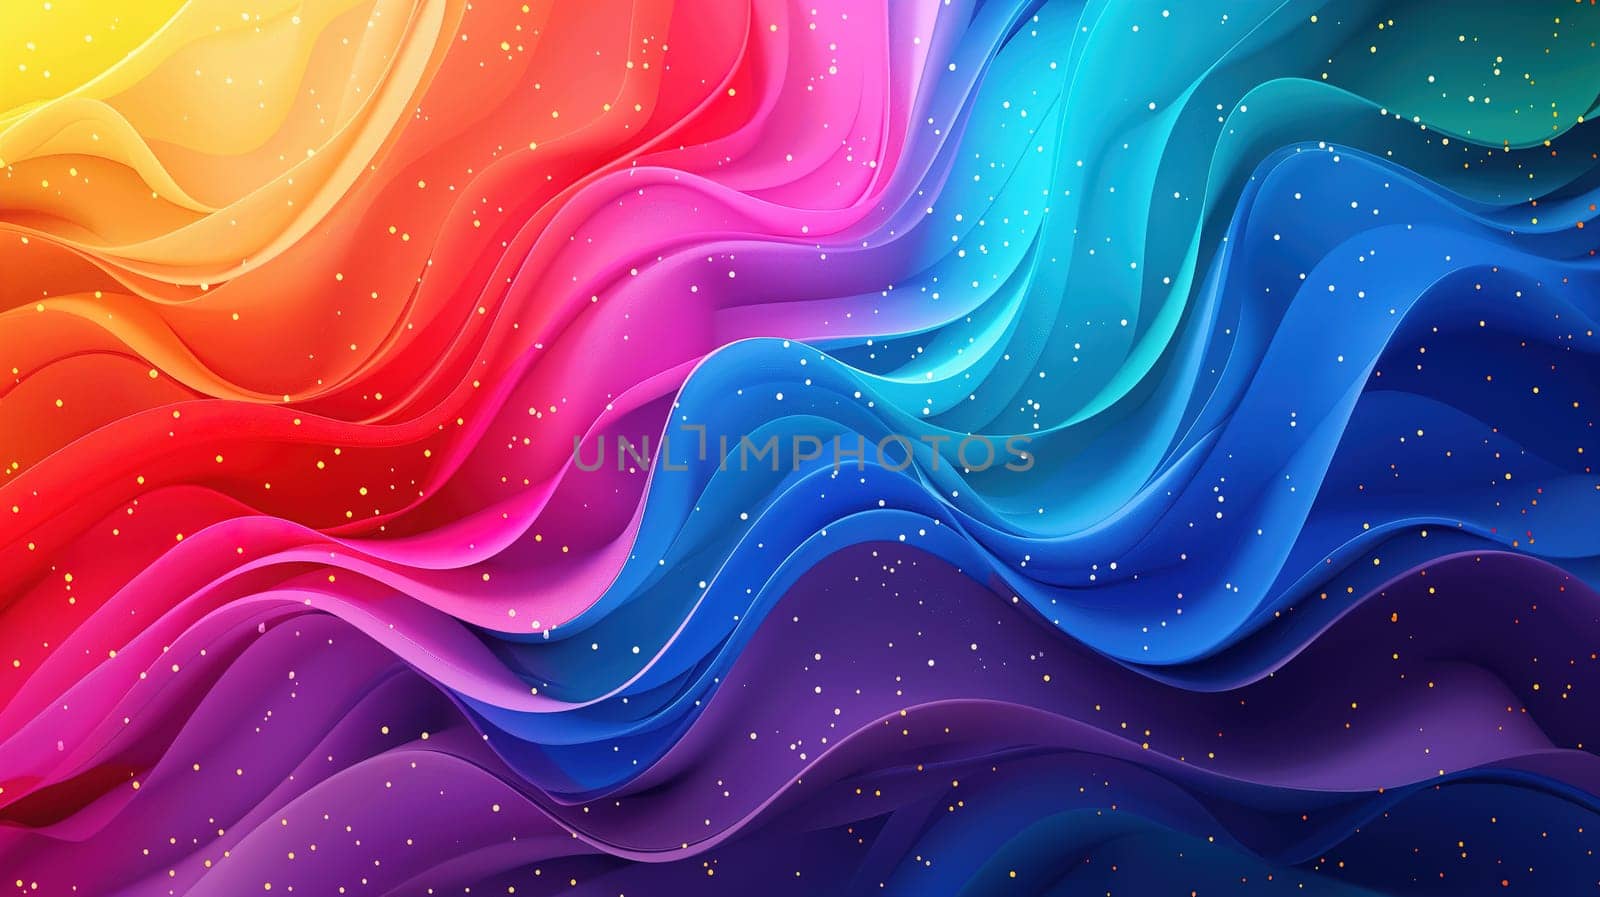 Multicolored waves and stars create an energetic and dynamic abstract background. The colors blend and swirl, evoking movement and excitement.